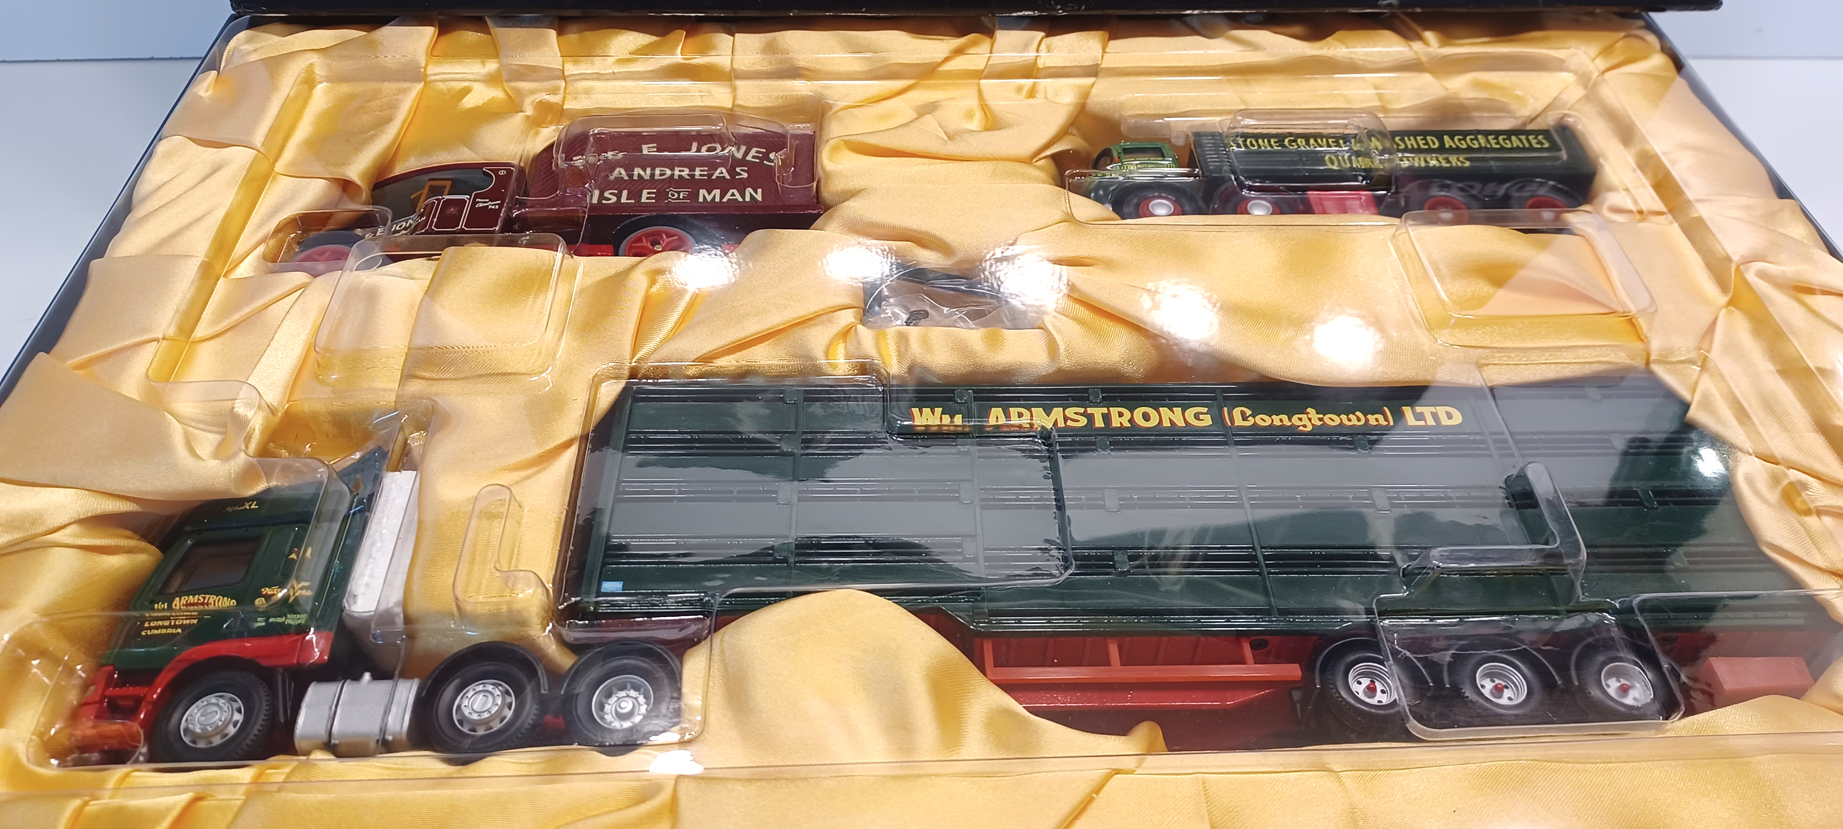 CORGI 150 YEARS OF FODEN - 1:50 SCALE CC99185 BOXED LIMITED EDITION, CONTAINS 3 DIECAST MODELS - Image 2 of 3